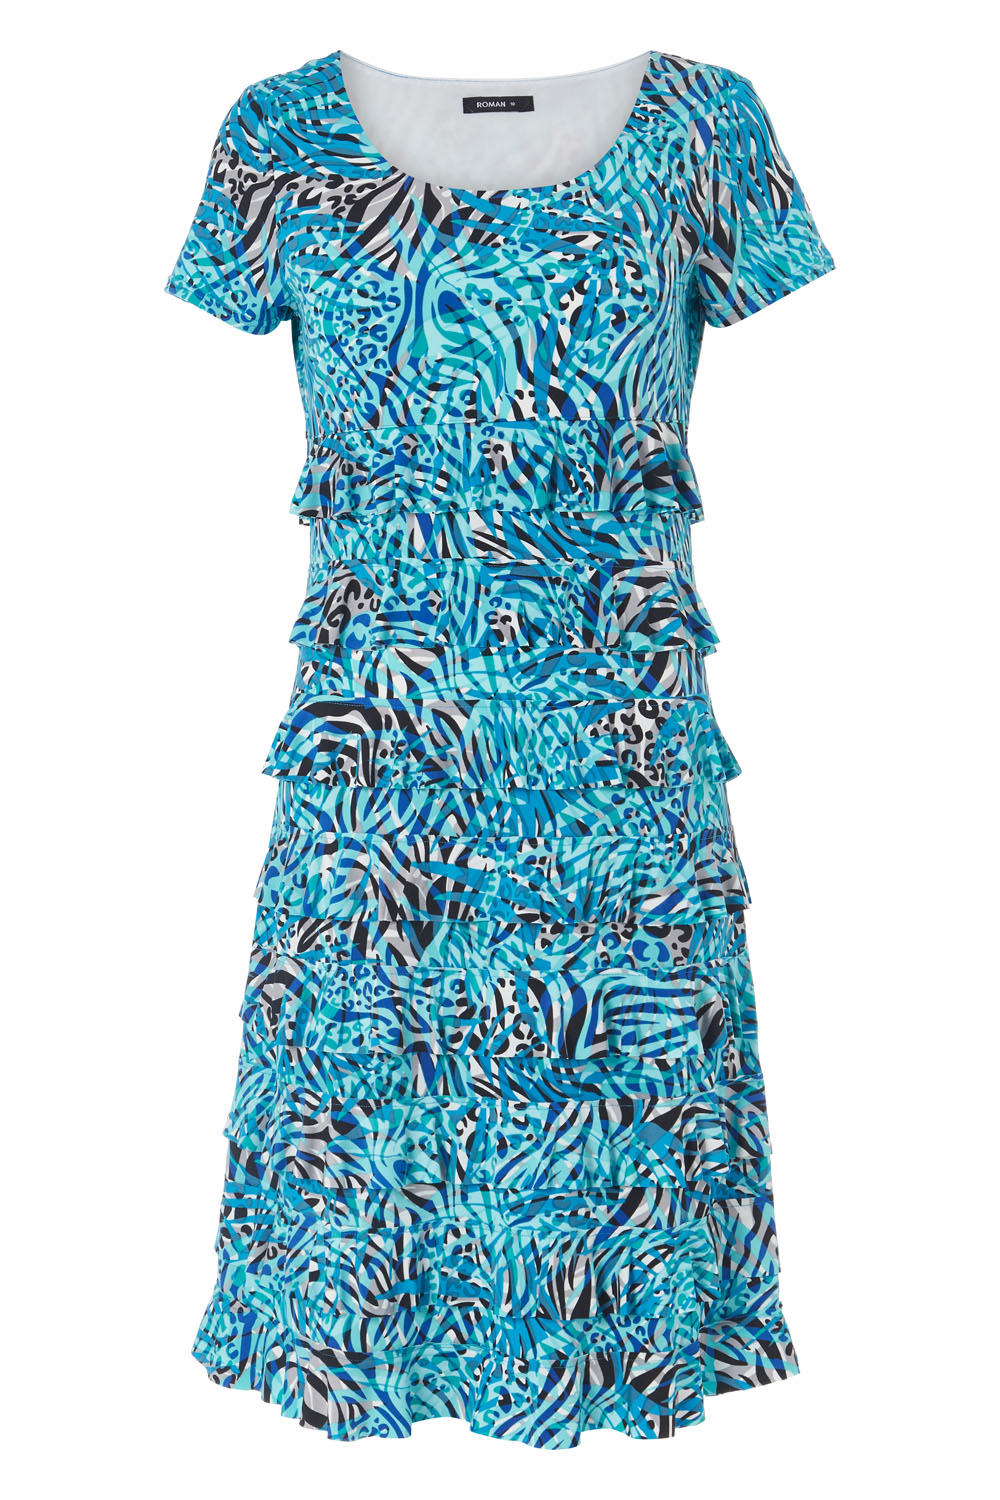 Blue Abstract Animal Print Frill Tiered Dress, Image 4 of 4